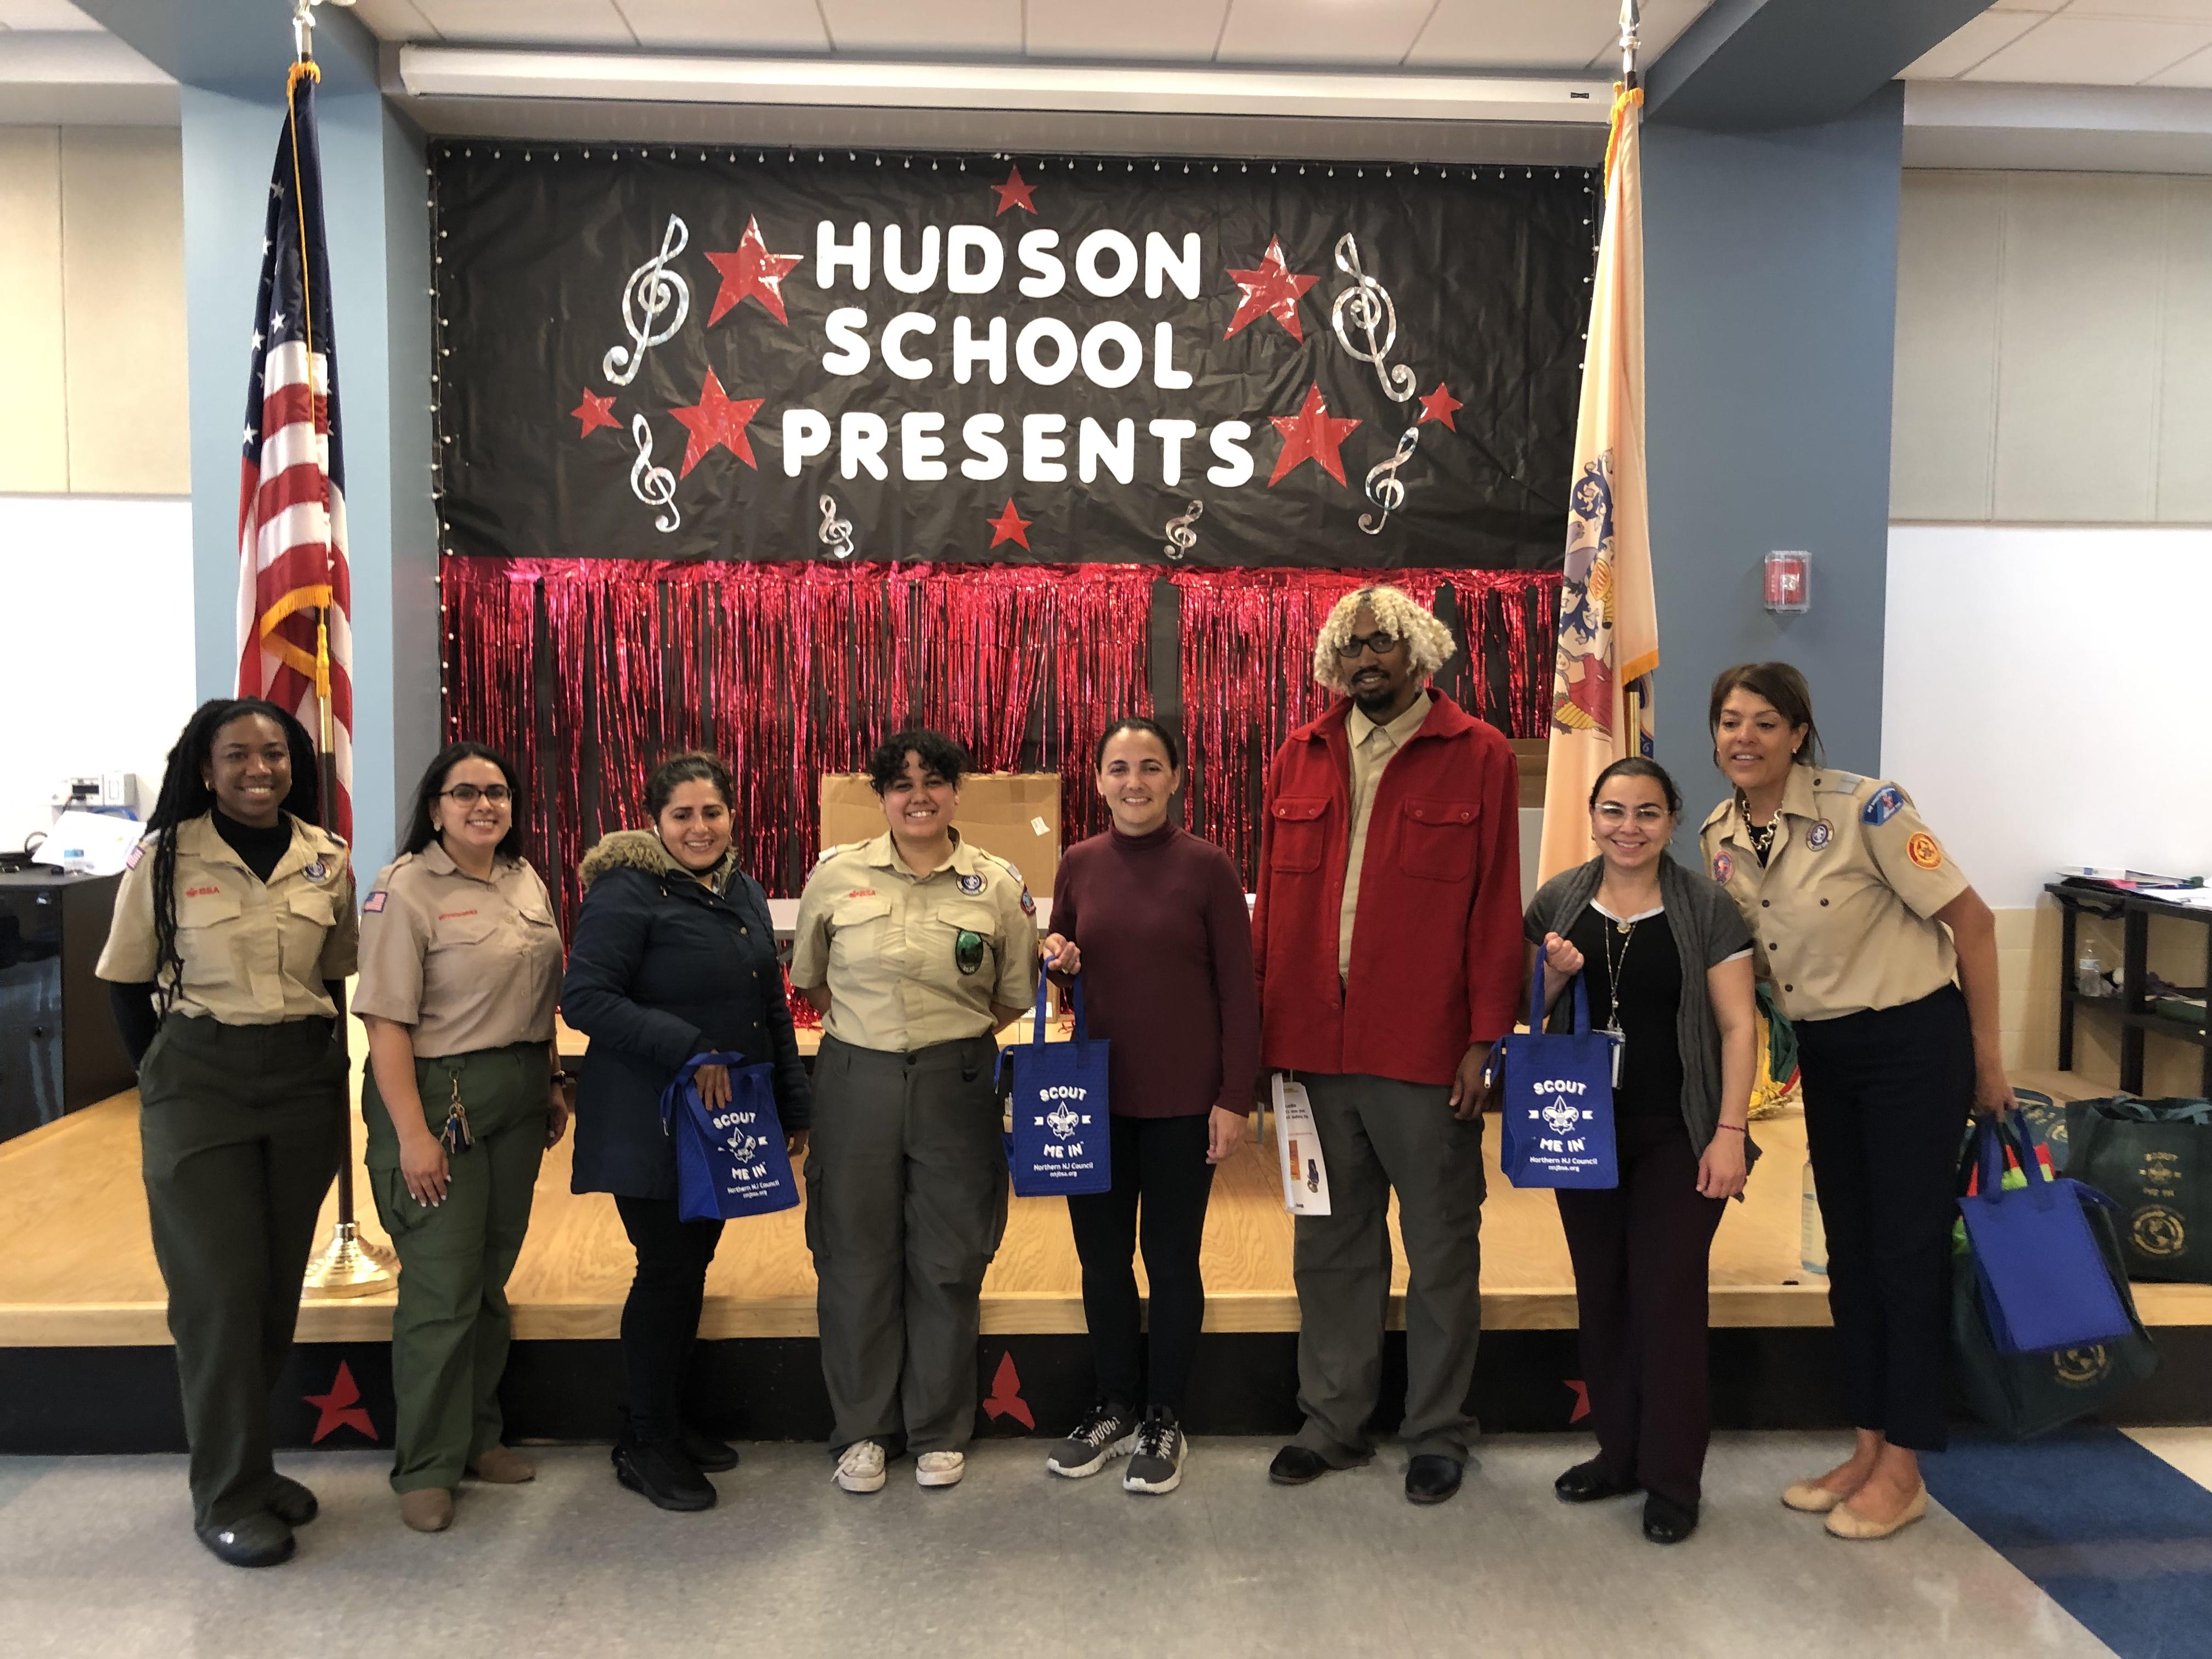 Cub Scouts Ceremony at Hudson School #9